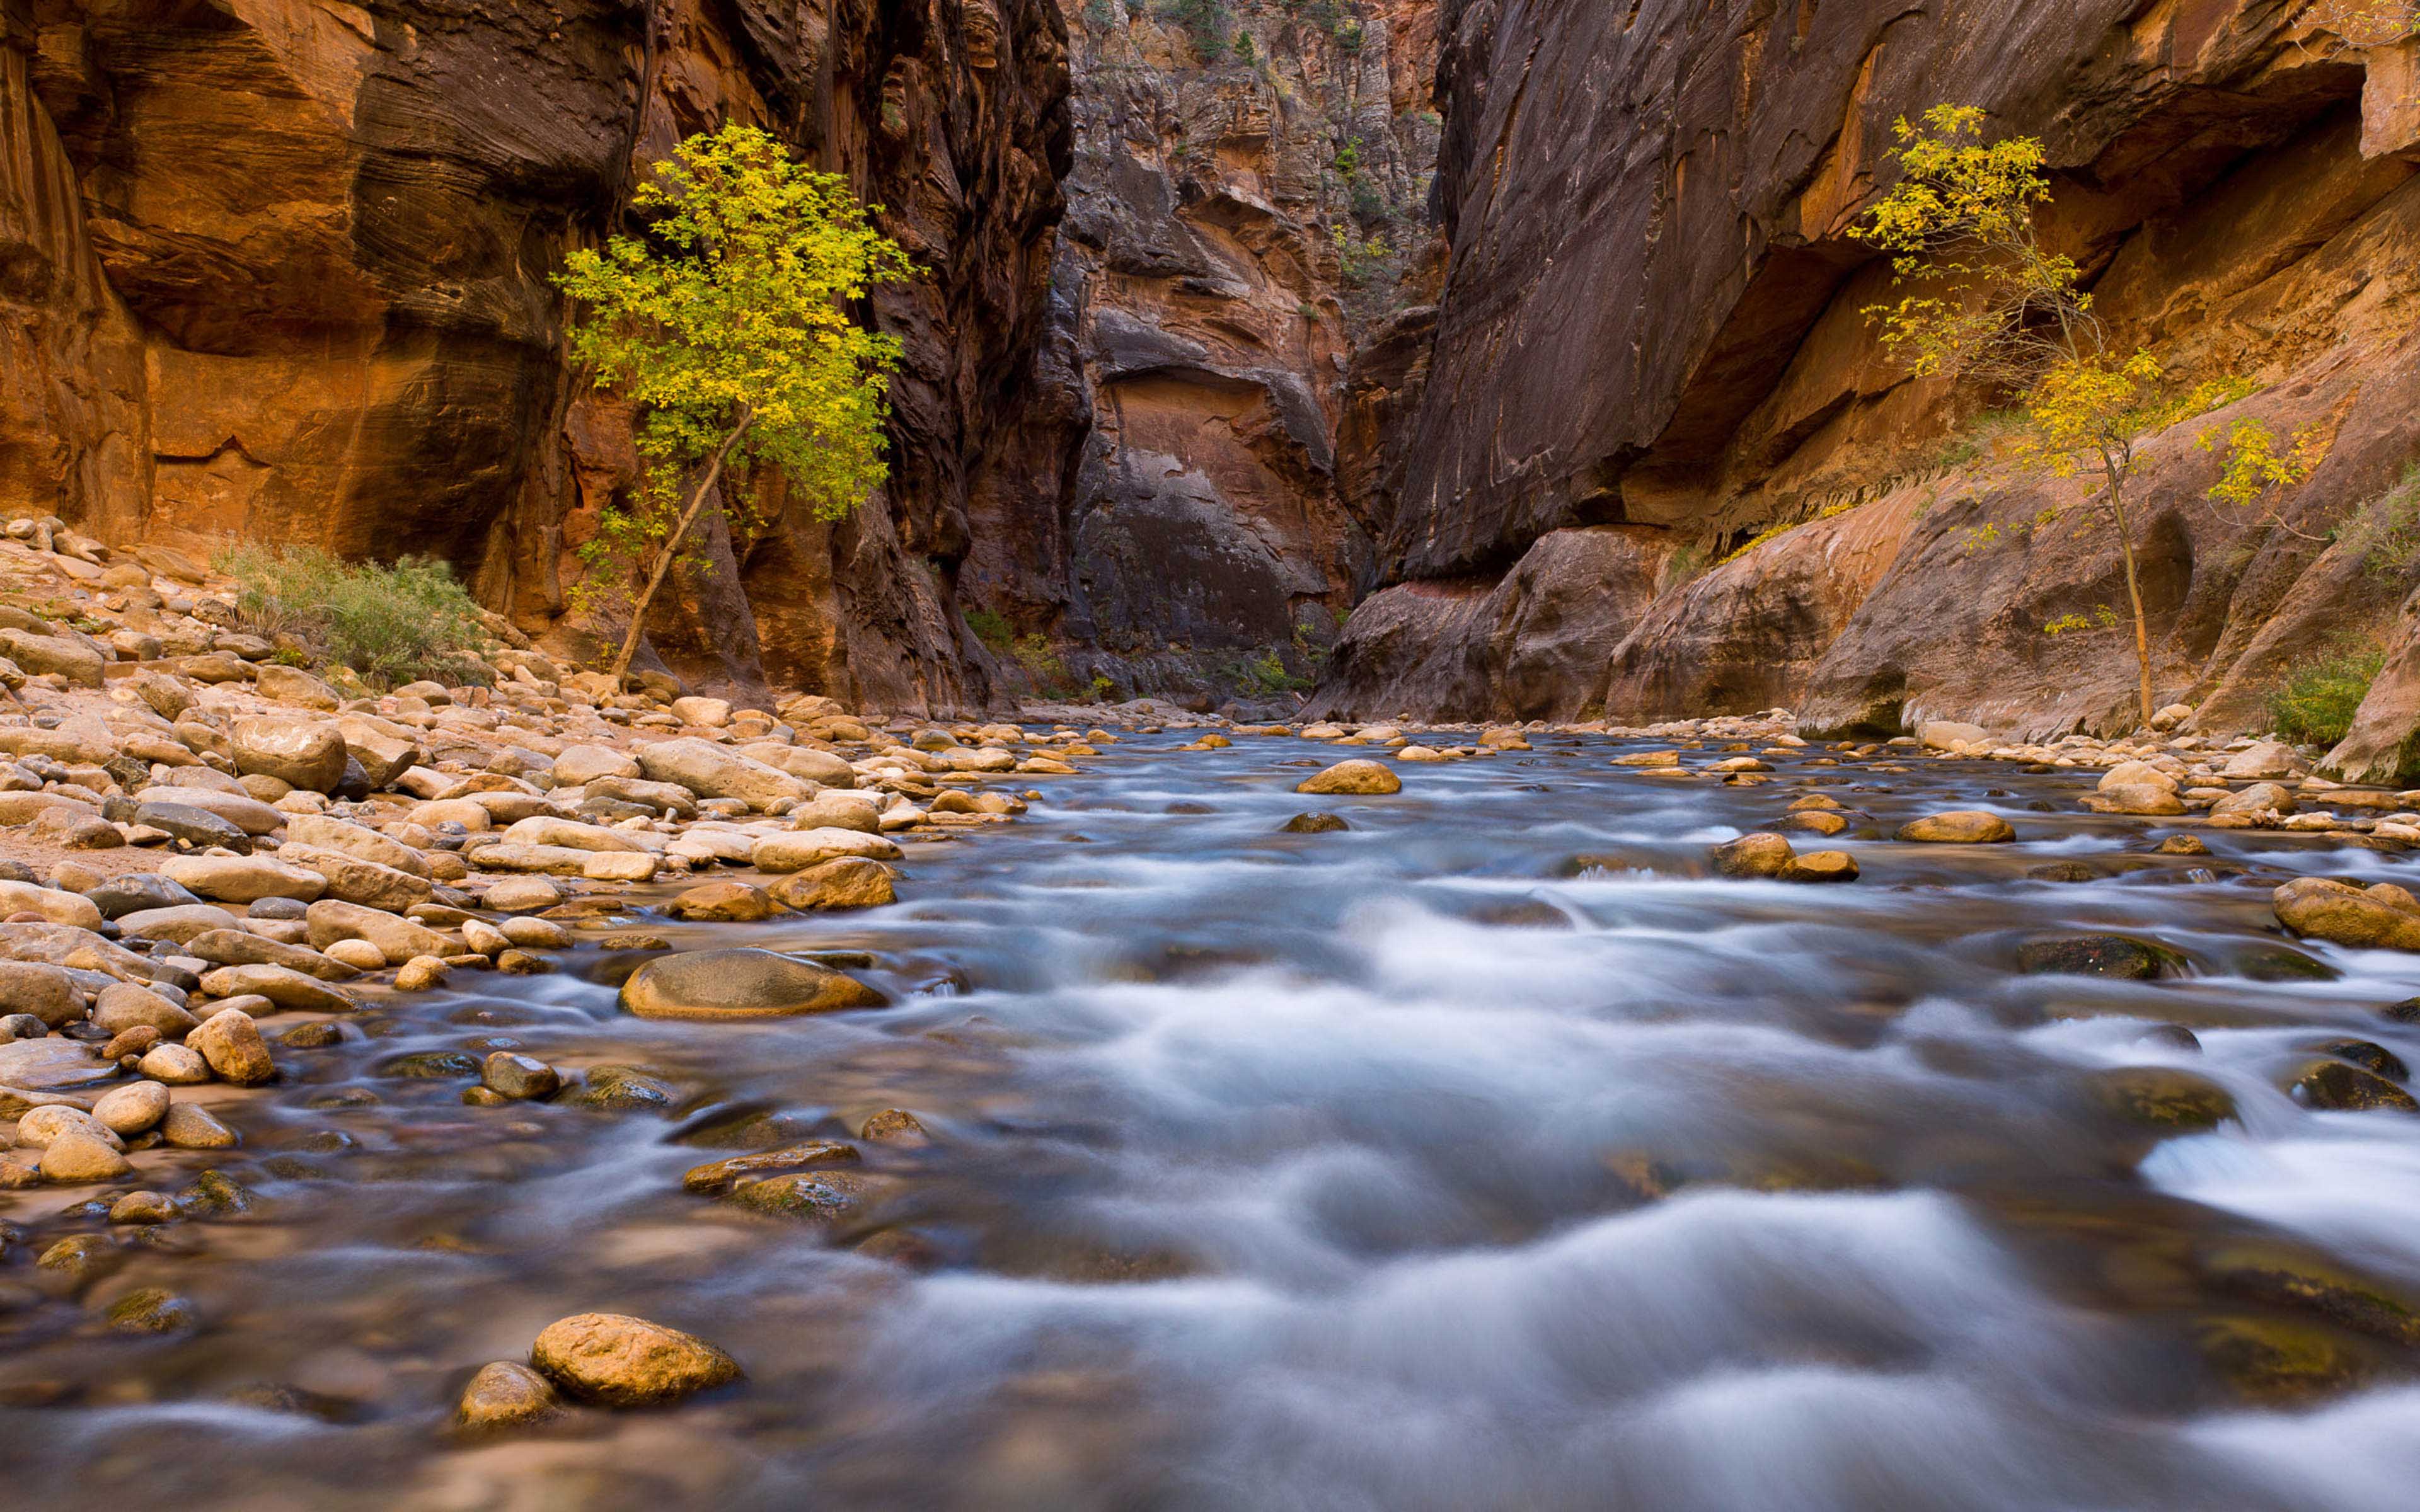 Land Virgin River Hiking The Zion National Park The Narrows Usa